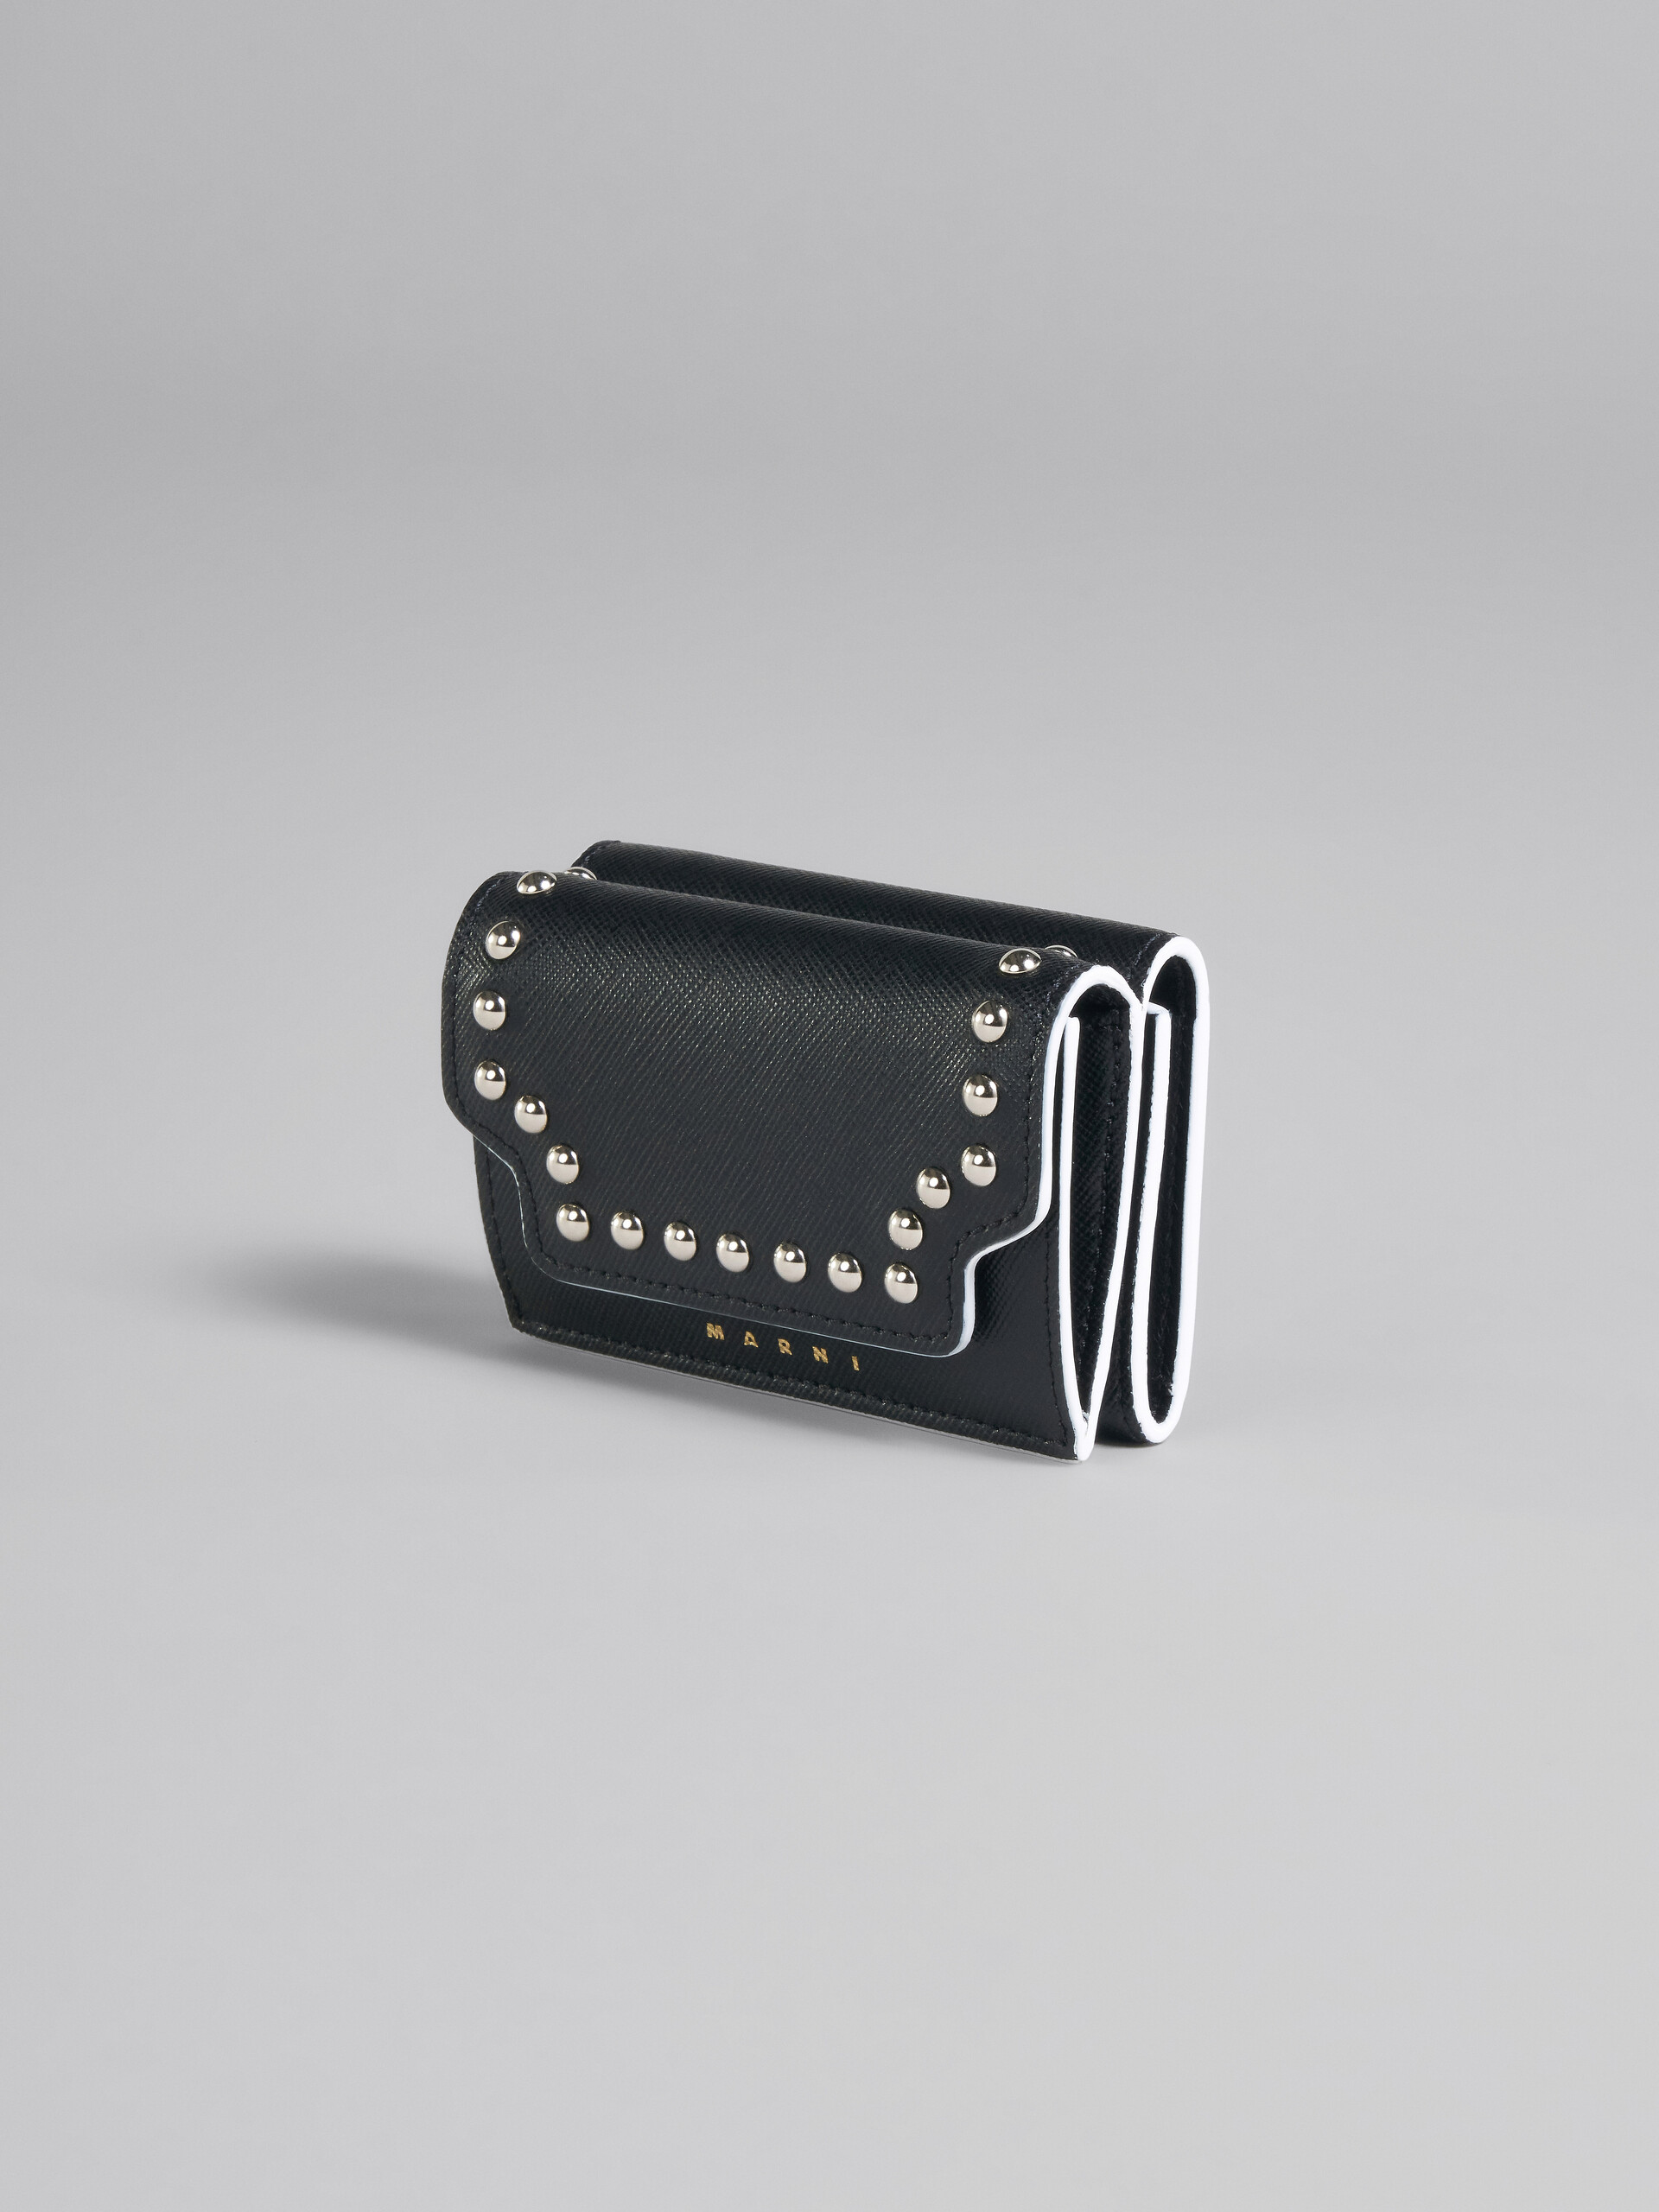 Black saffiano leather tri-fold wallet with studs - Wallets - Image 4